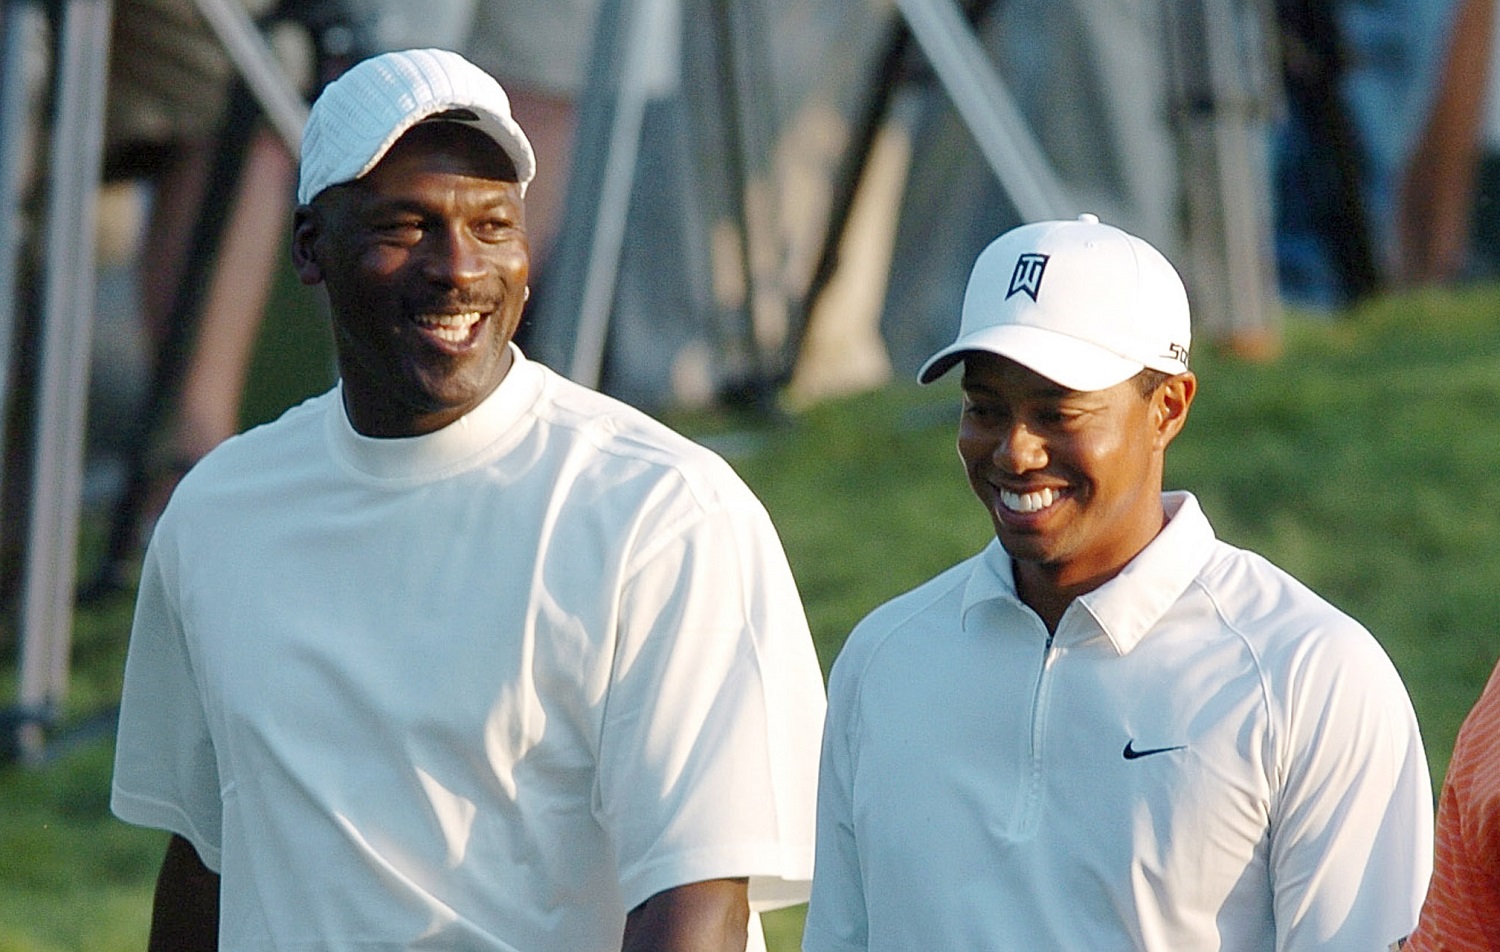 Michael Jordan and Tiger Woods had a bet n the NBA legend's score on the U.S. Open golf course.